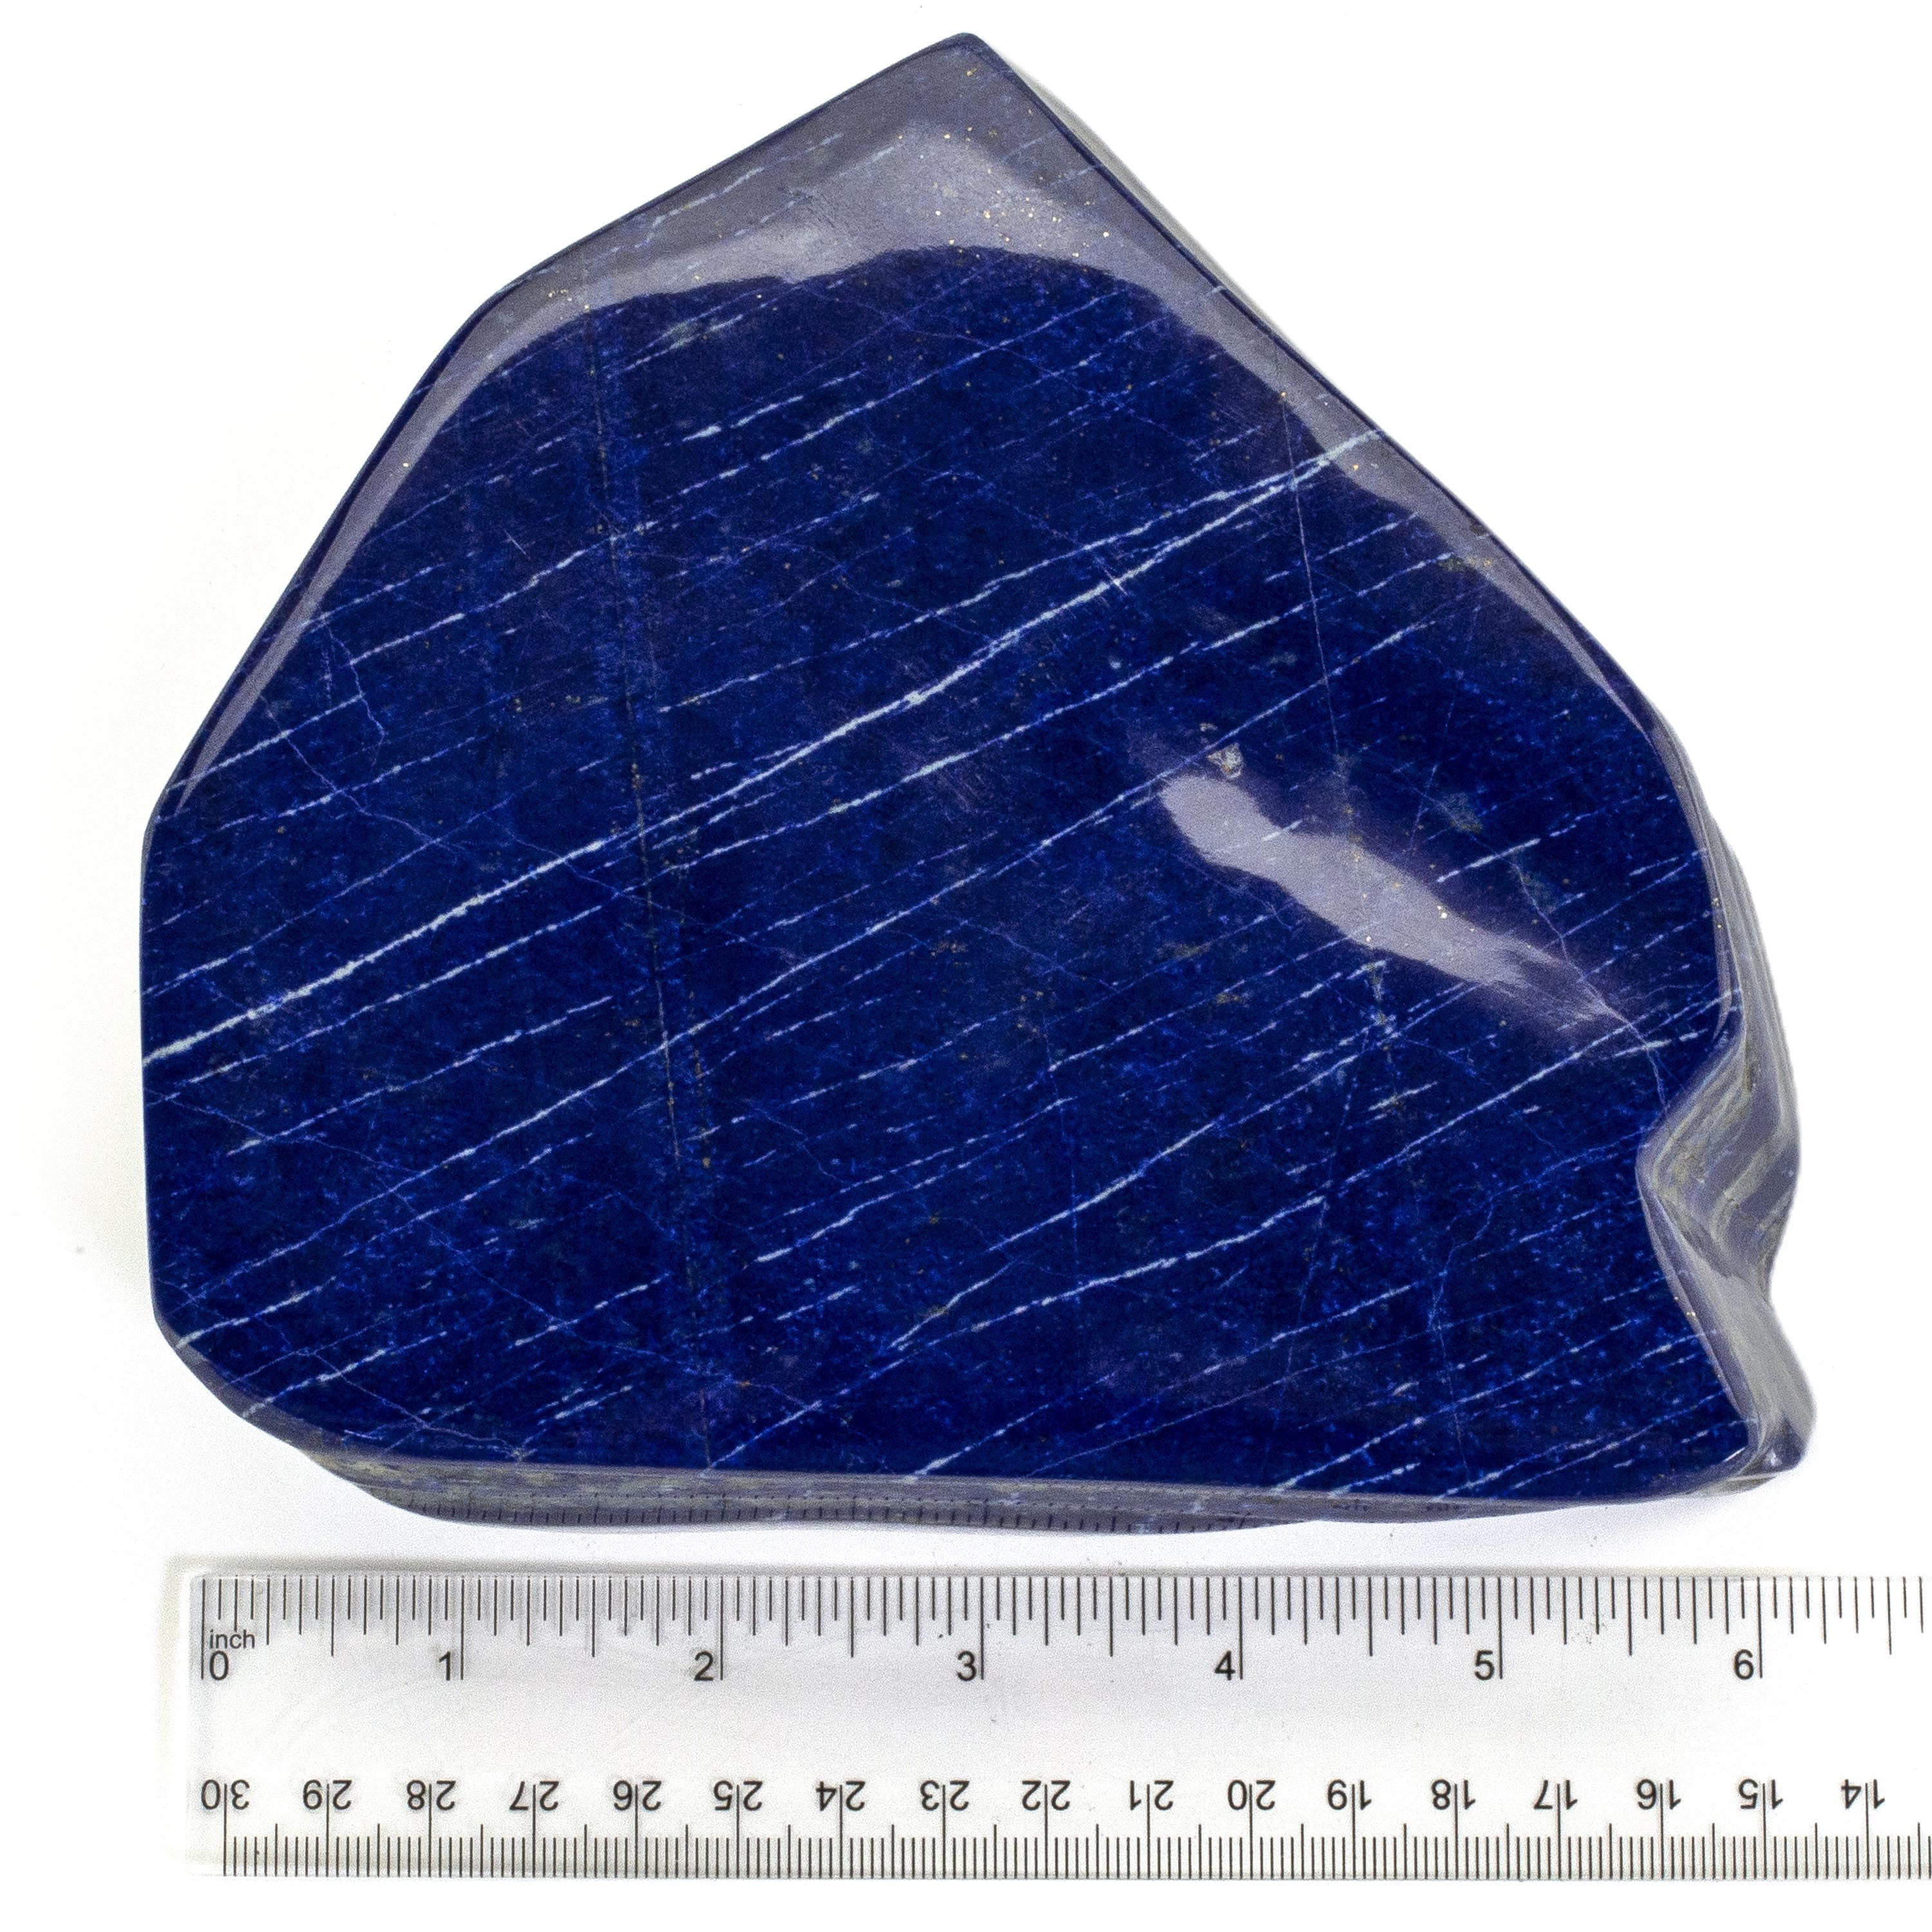 Kalifano Lapis Lapis Lazuil Freeform from Afghanistan - 2.5 kg / 5.5 lbs LP2700.001